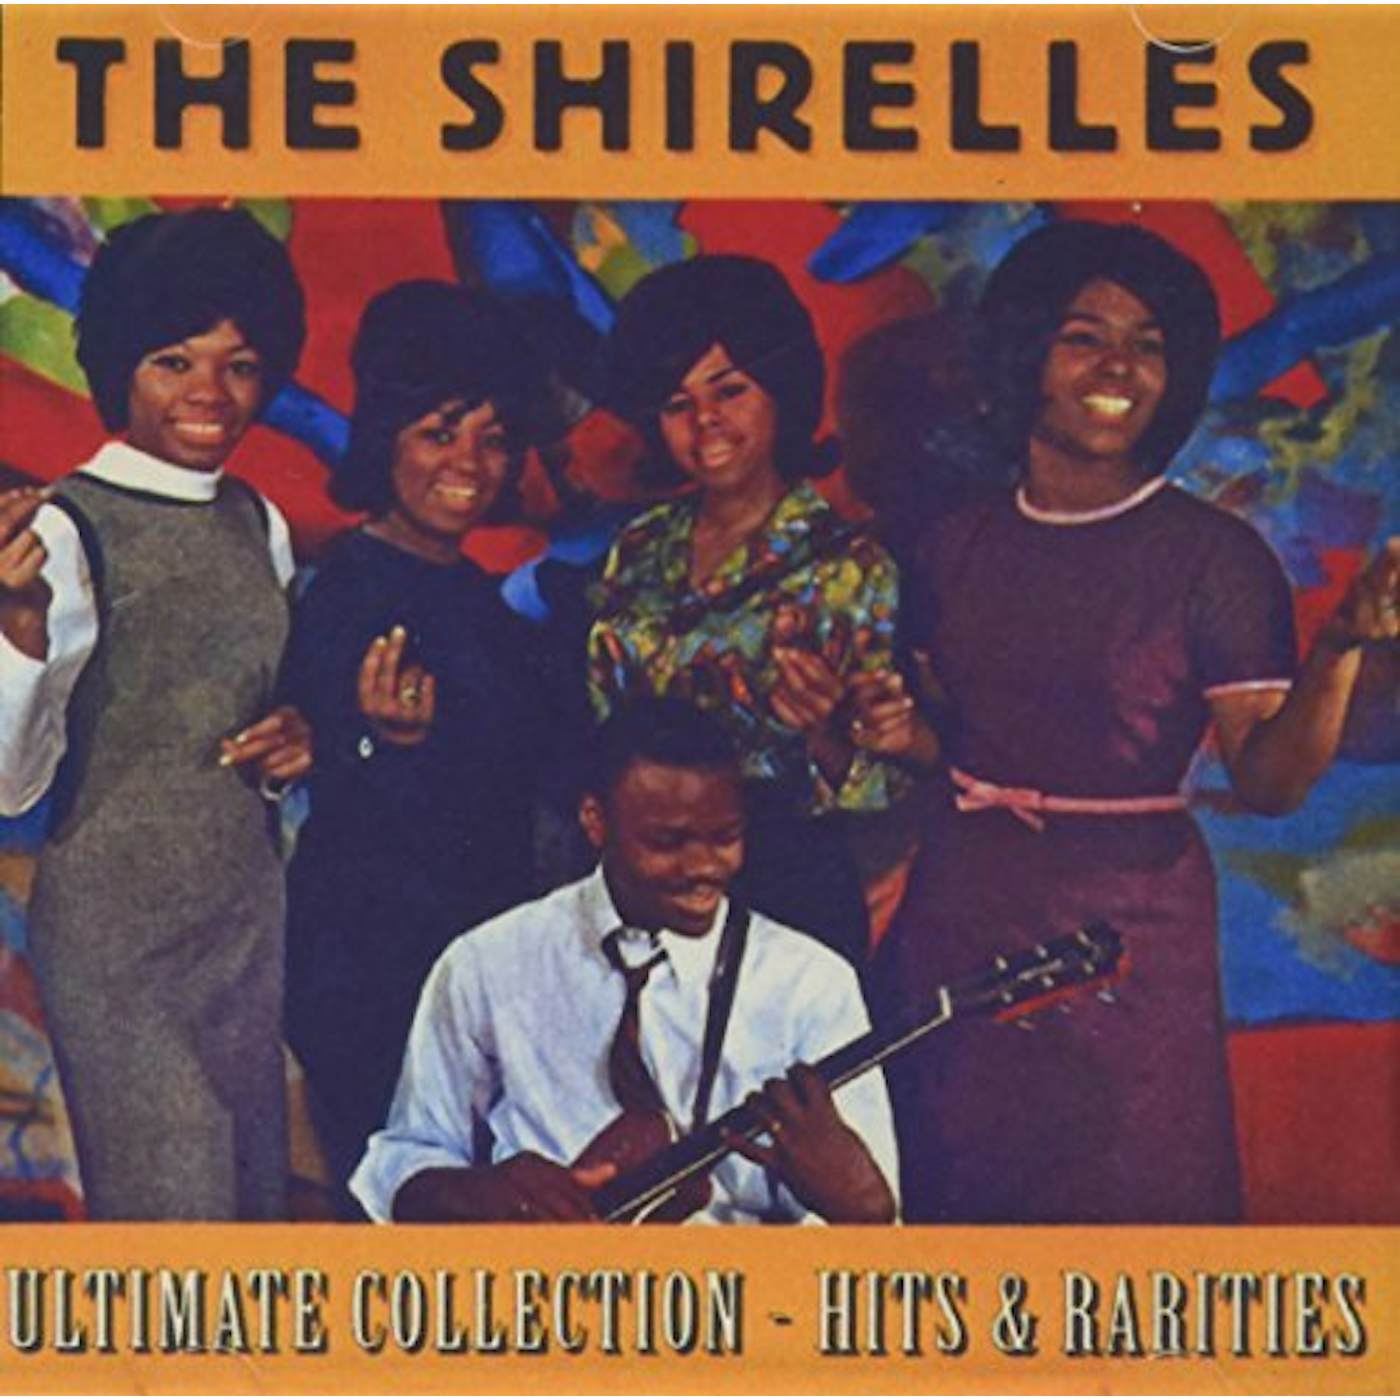 The Shirelles ULTIMATE COLLECTION CD